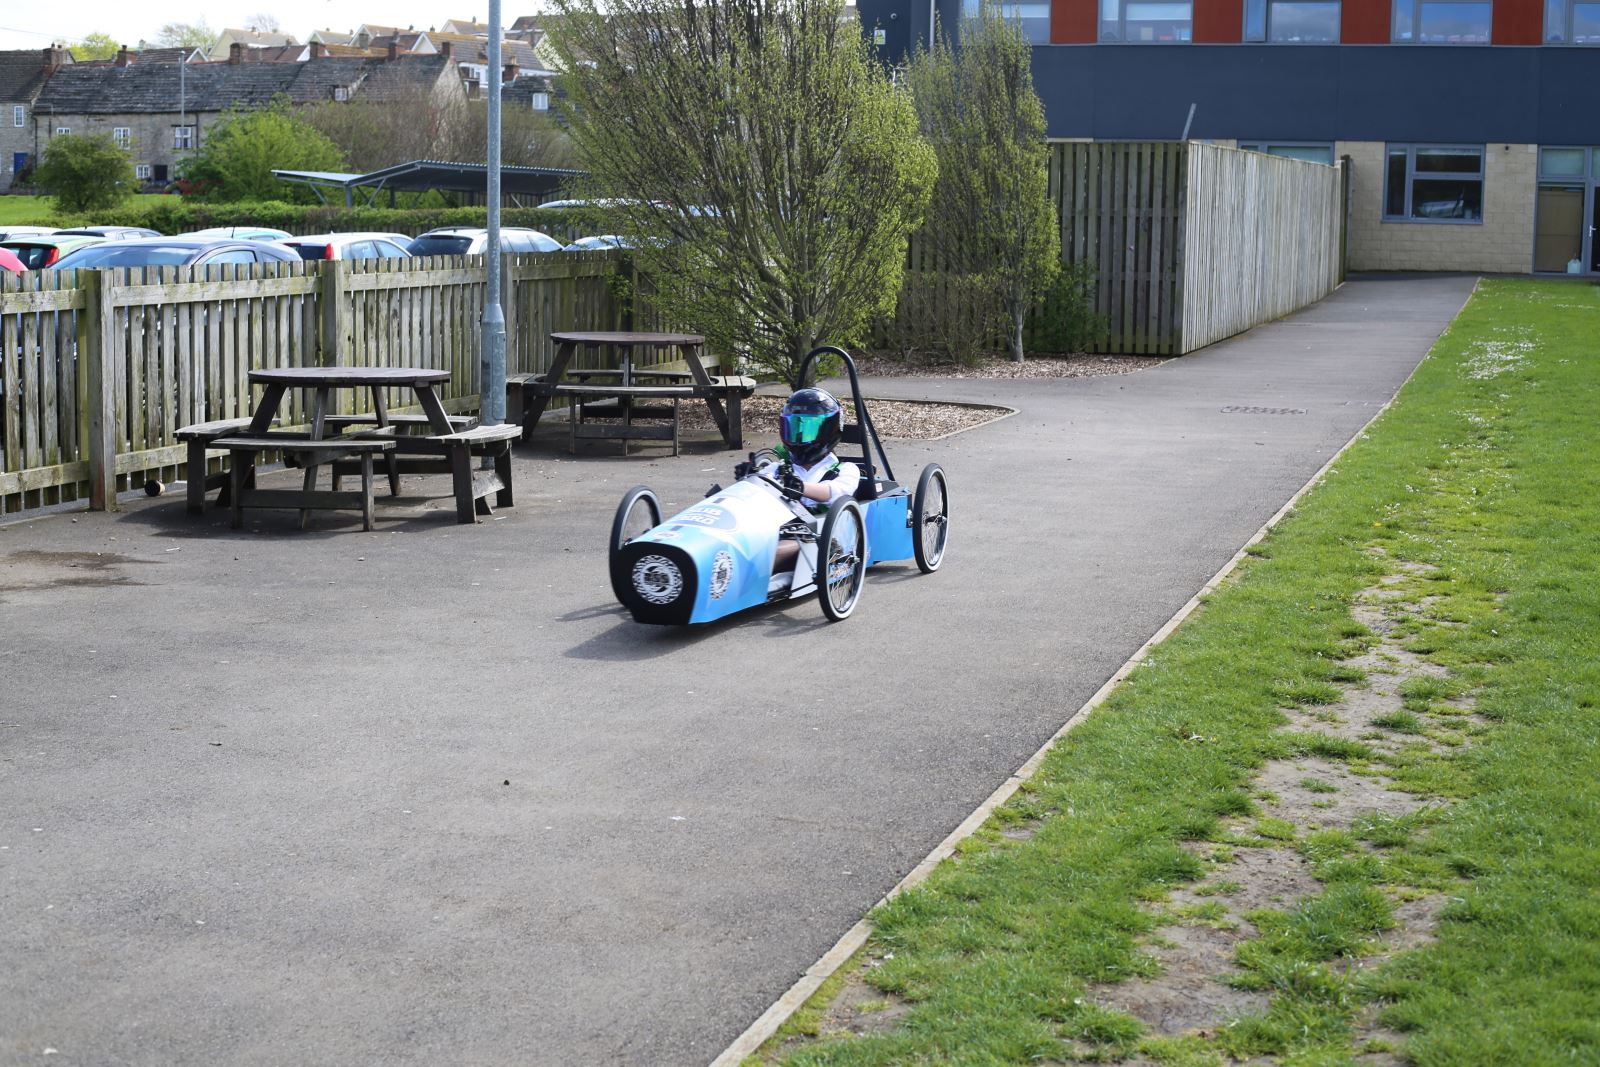 The Swanage School Race Car test drive on school grounds